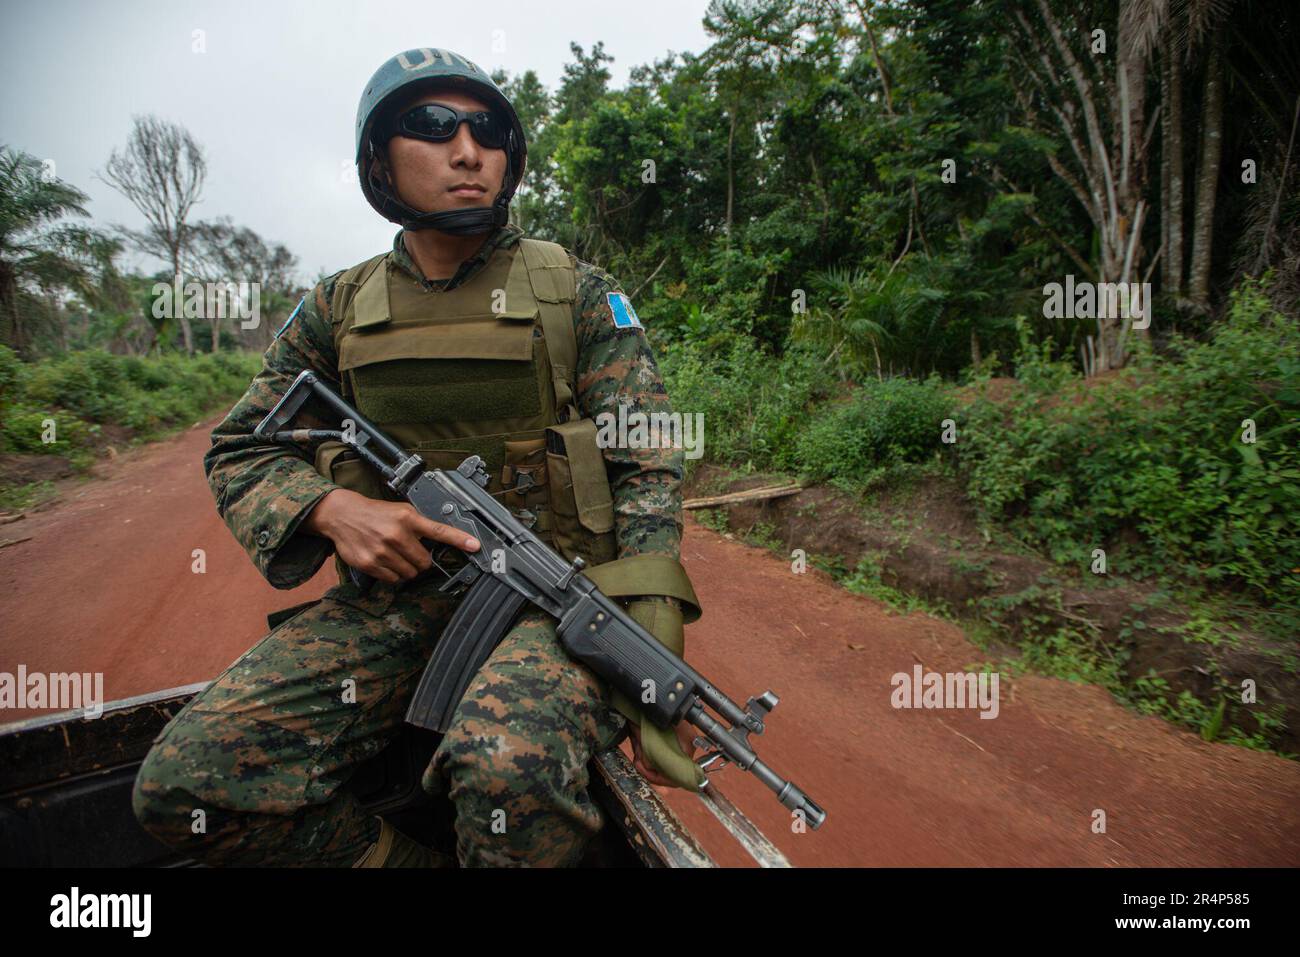 A Guatemalan army peacekeeper rides on the back of a truck, armed with a Galil assault rifle, Democratic republic of Congo Stock Photo